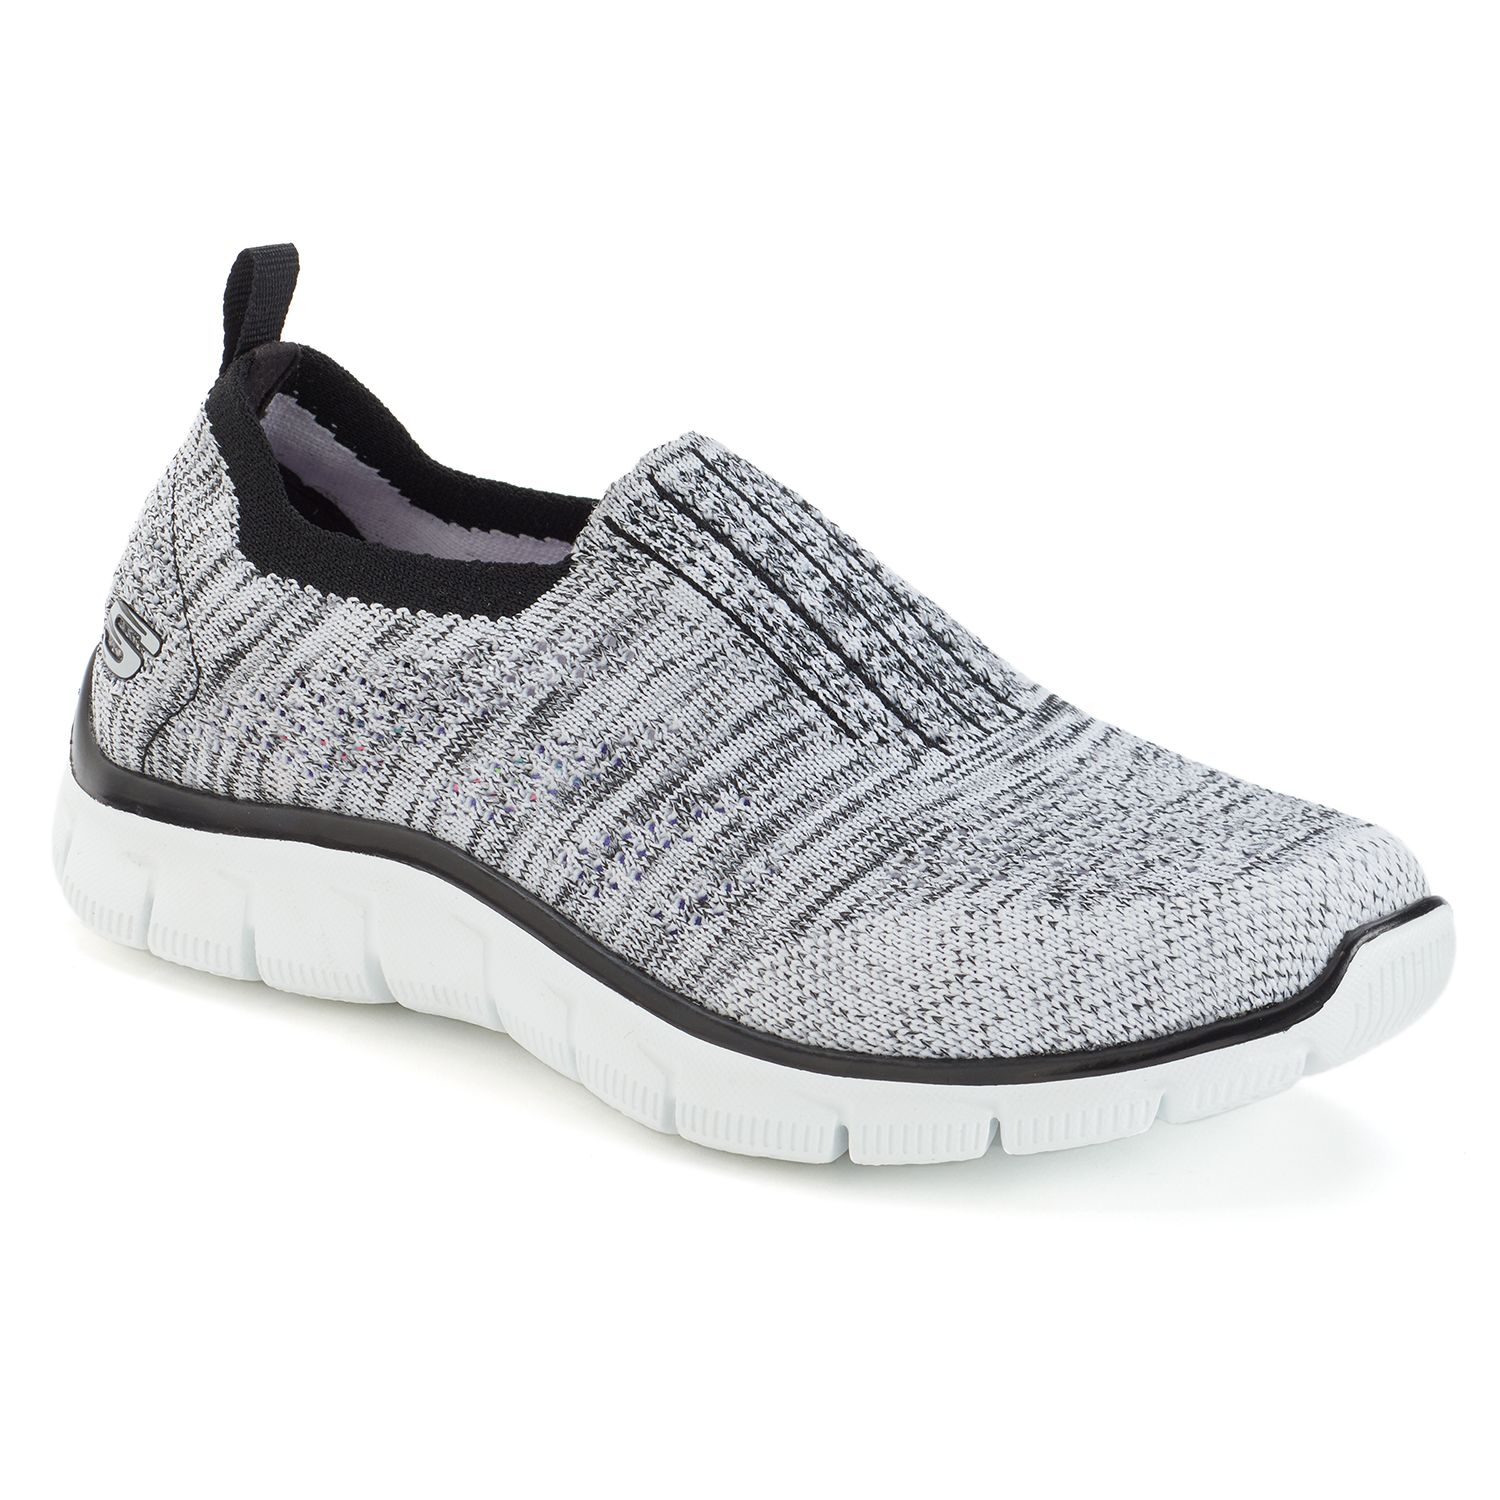 Skechers Relaxed Fit Empire Stretch 